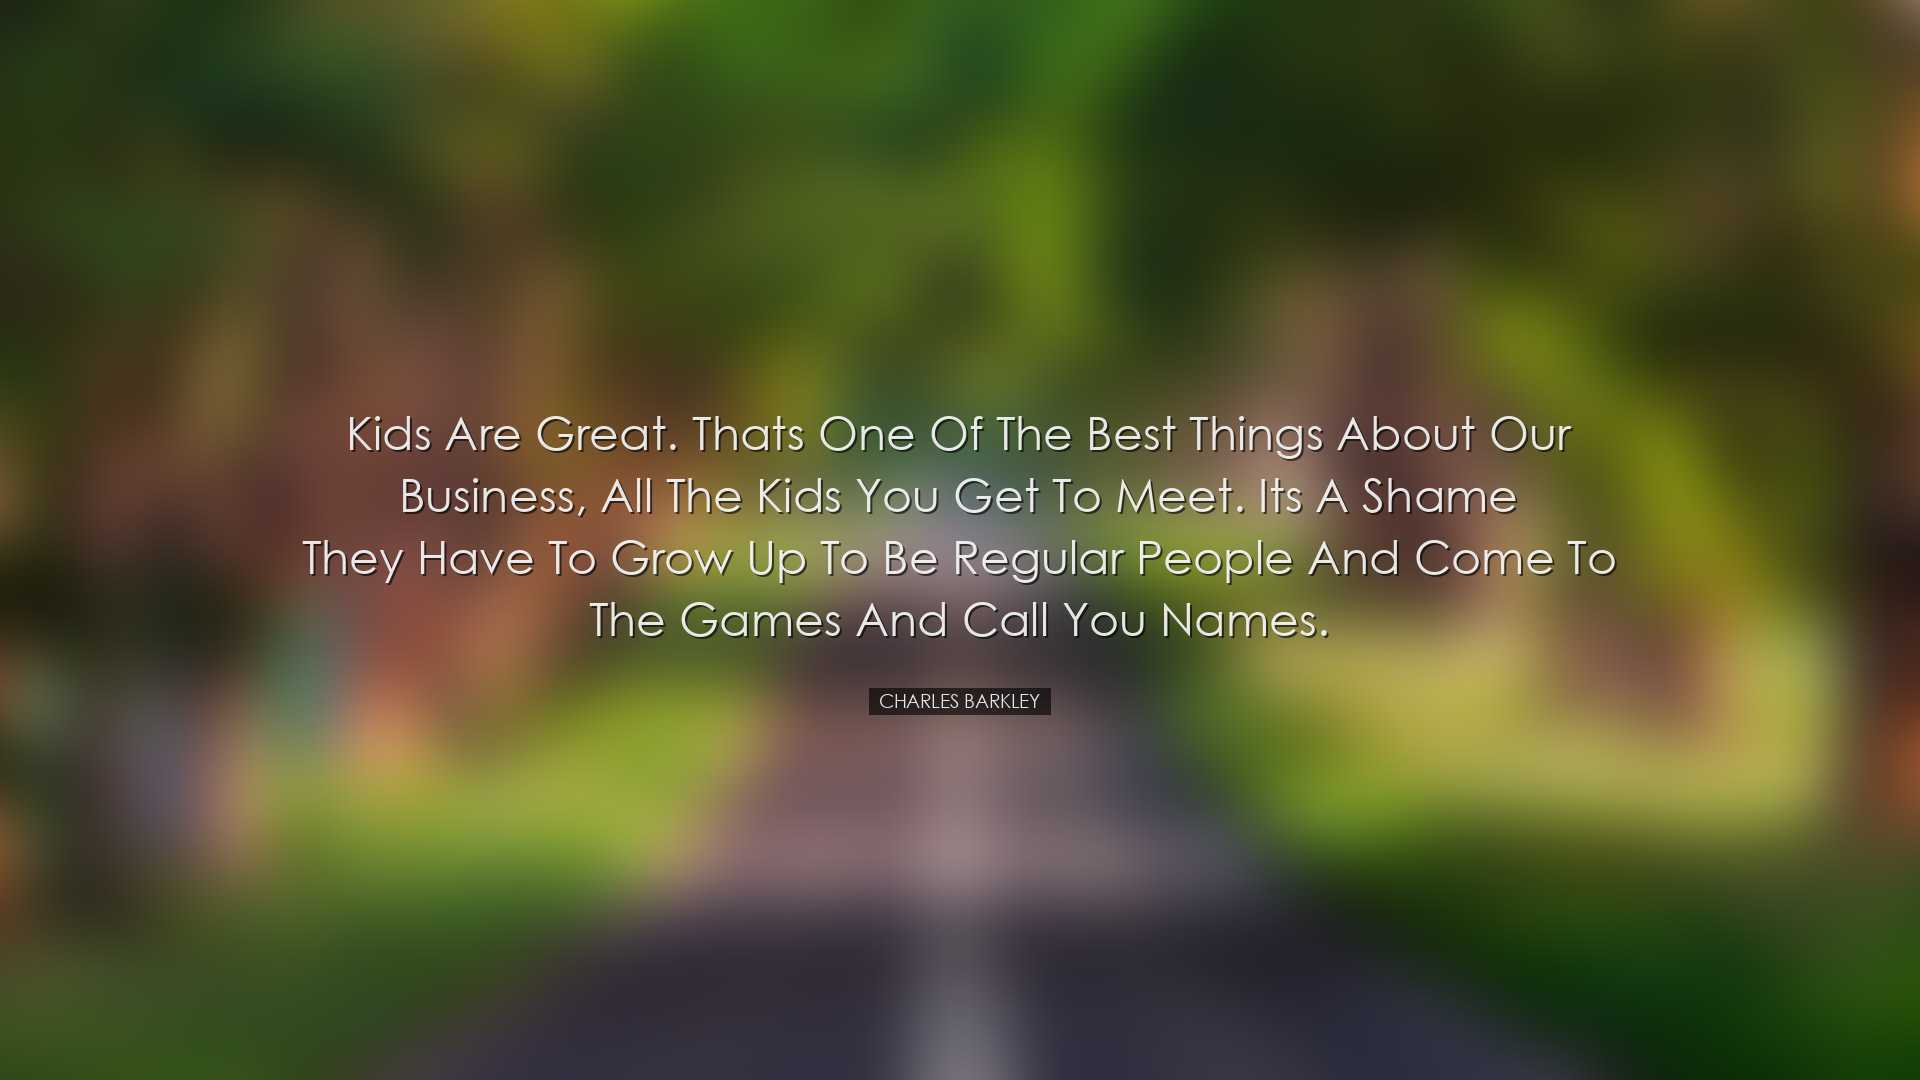 Kids are great. Thats one of the best things about our business, a